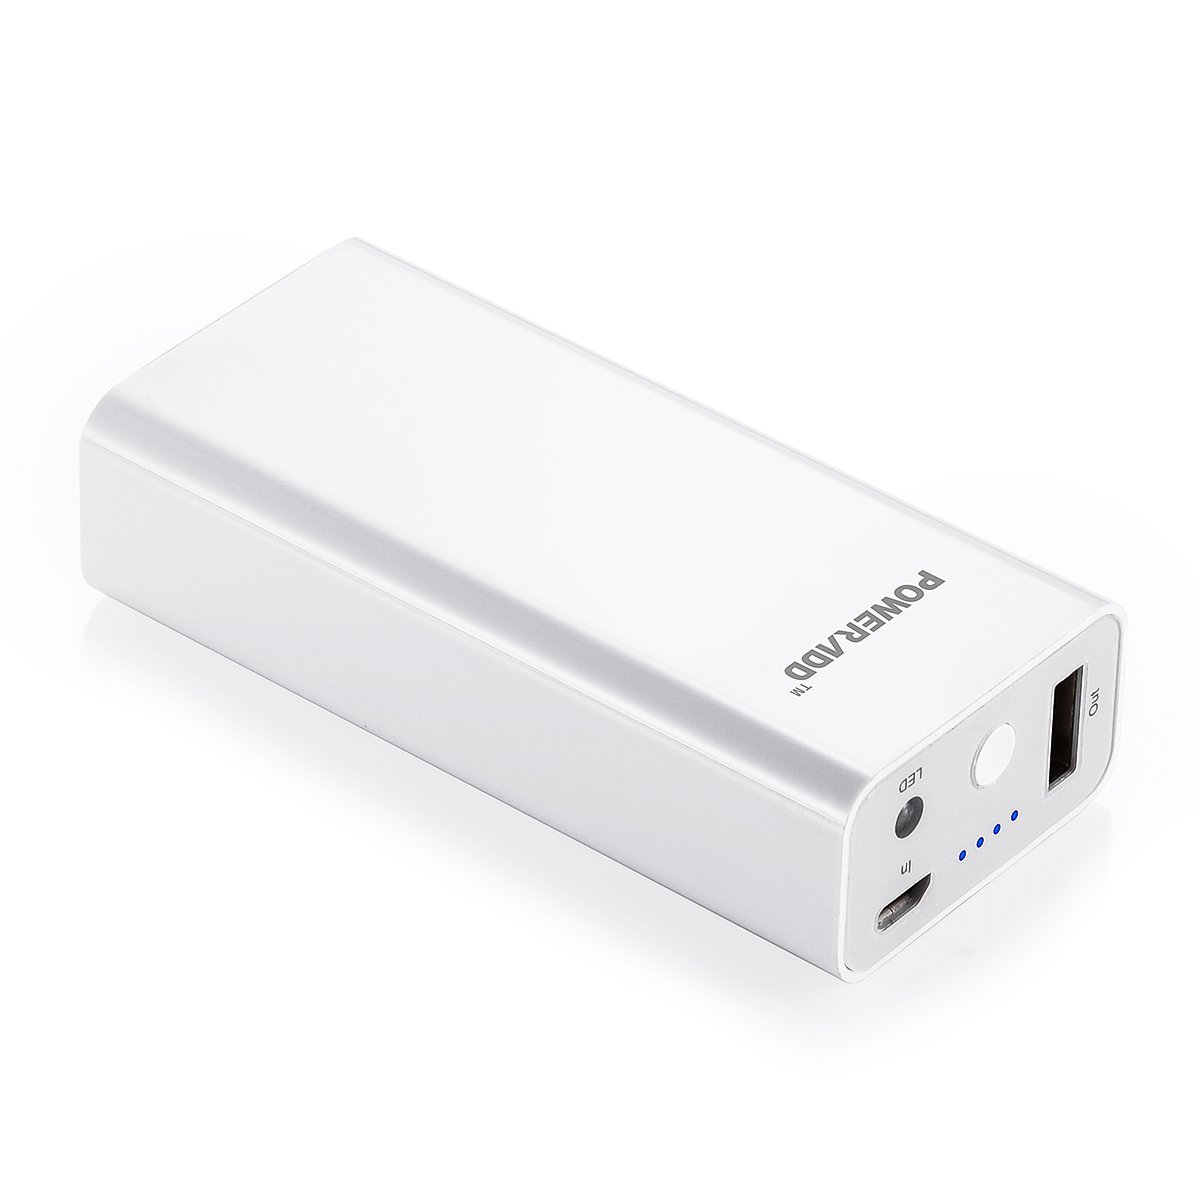 Poweradd Pilot X1 5200mAh Portable Charger Power Bank, Constructed with Premium LG Battery Cells - White